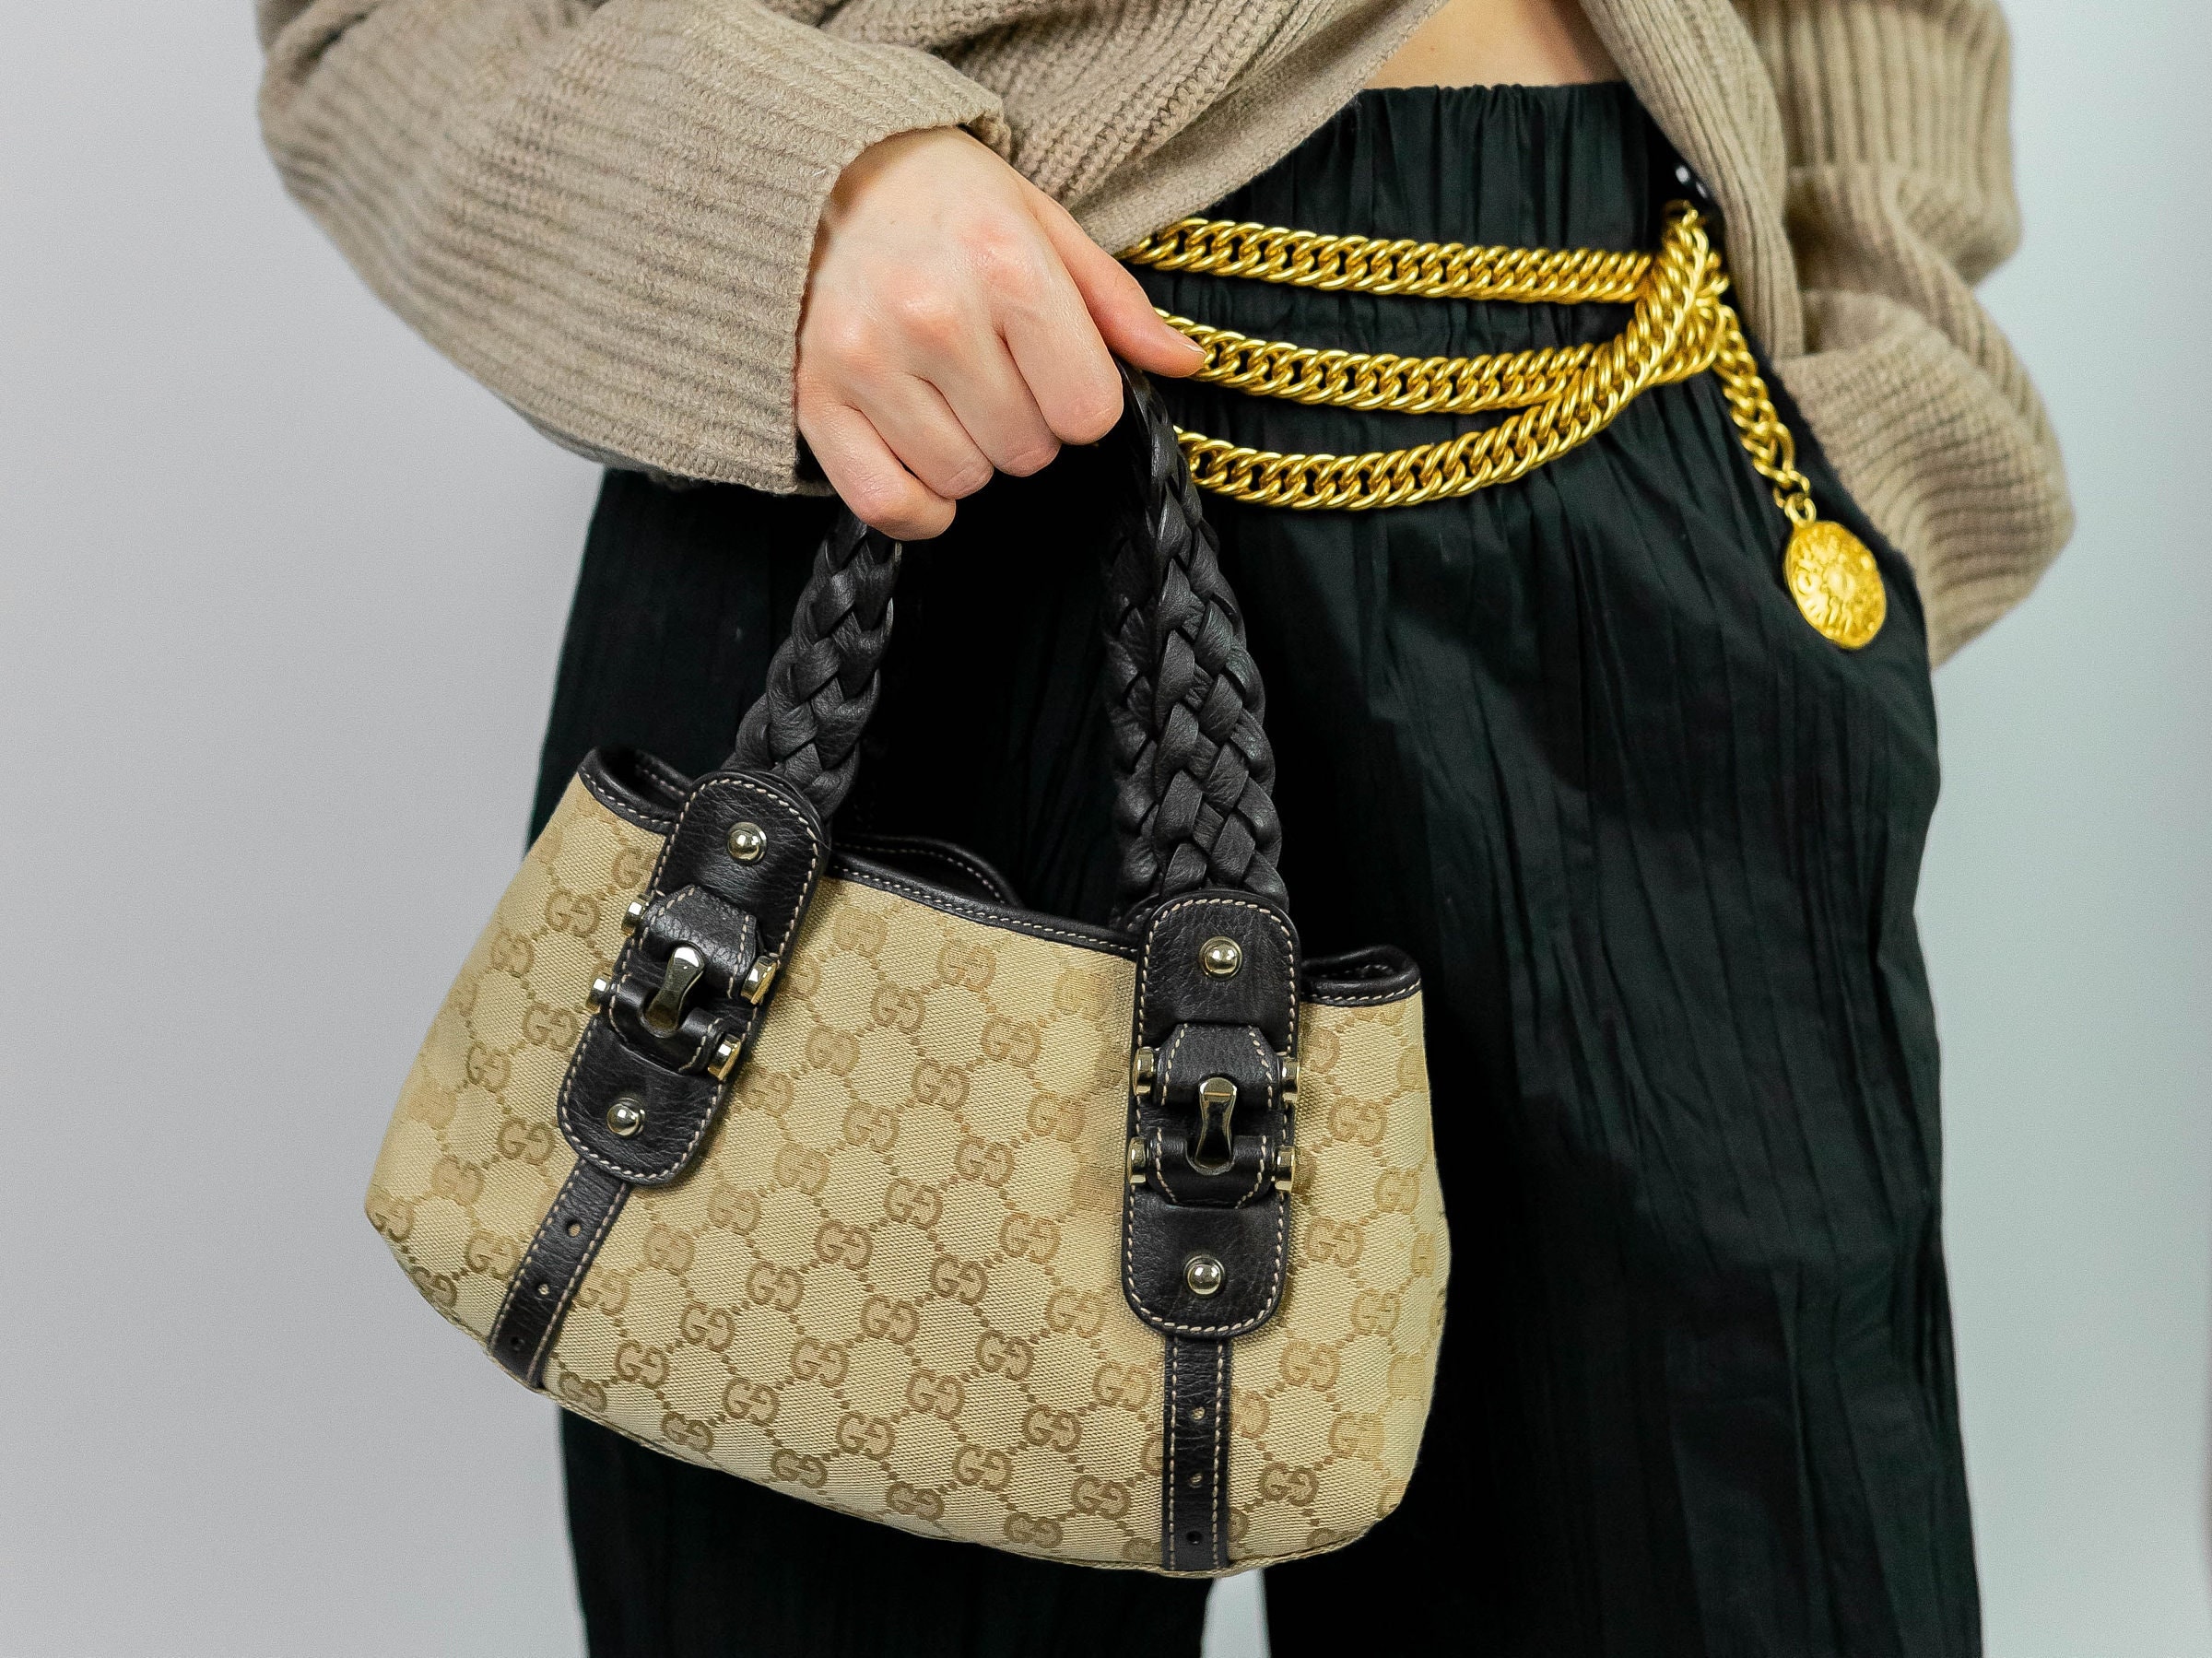 Chanel Set Of 4 Mini Bags for Pre-Fall 2022 Collection